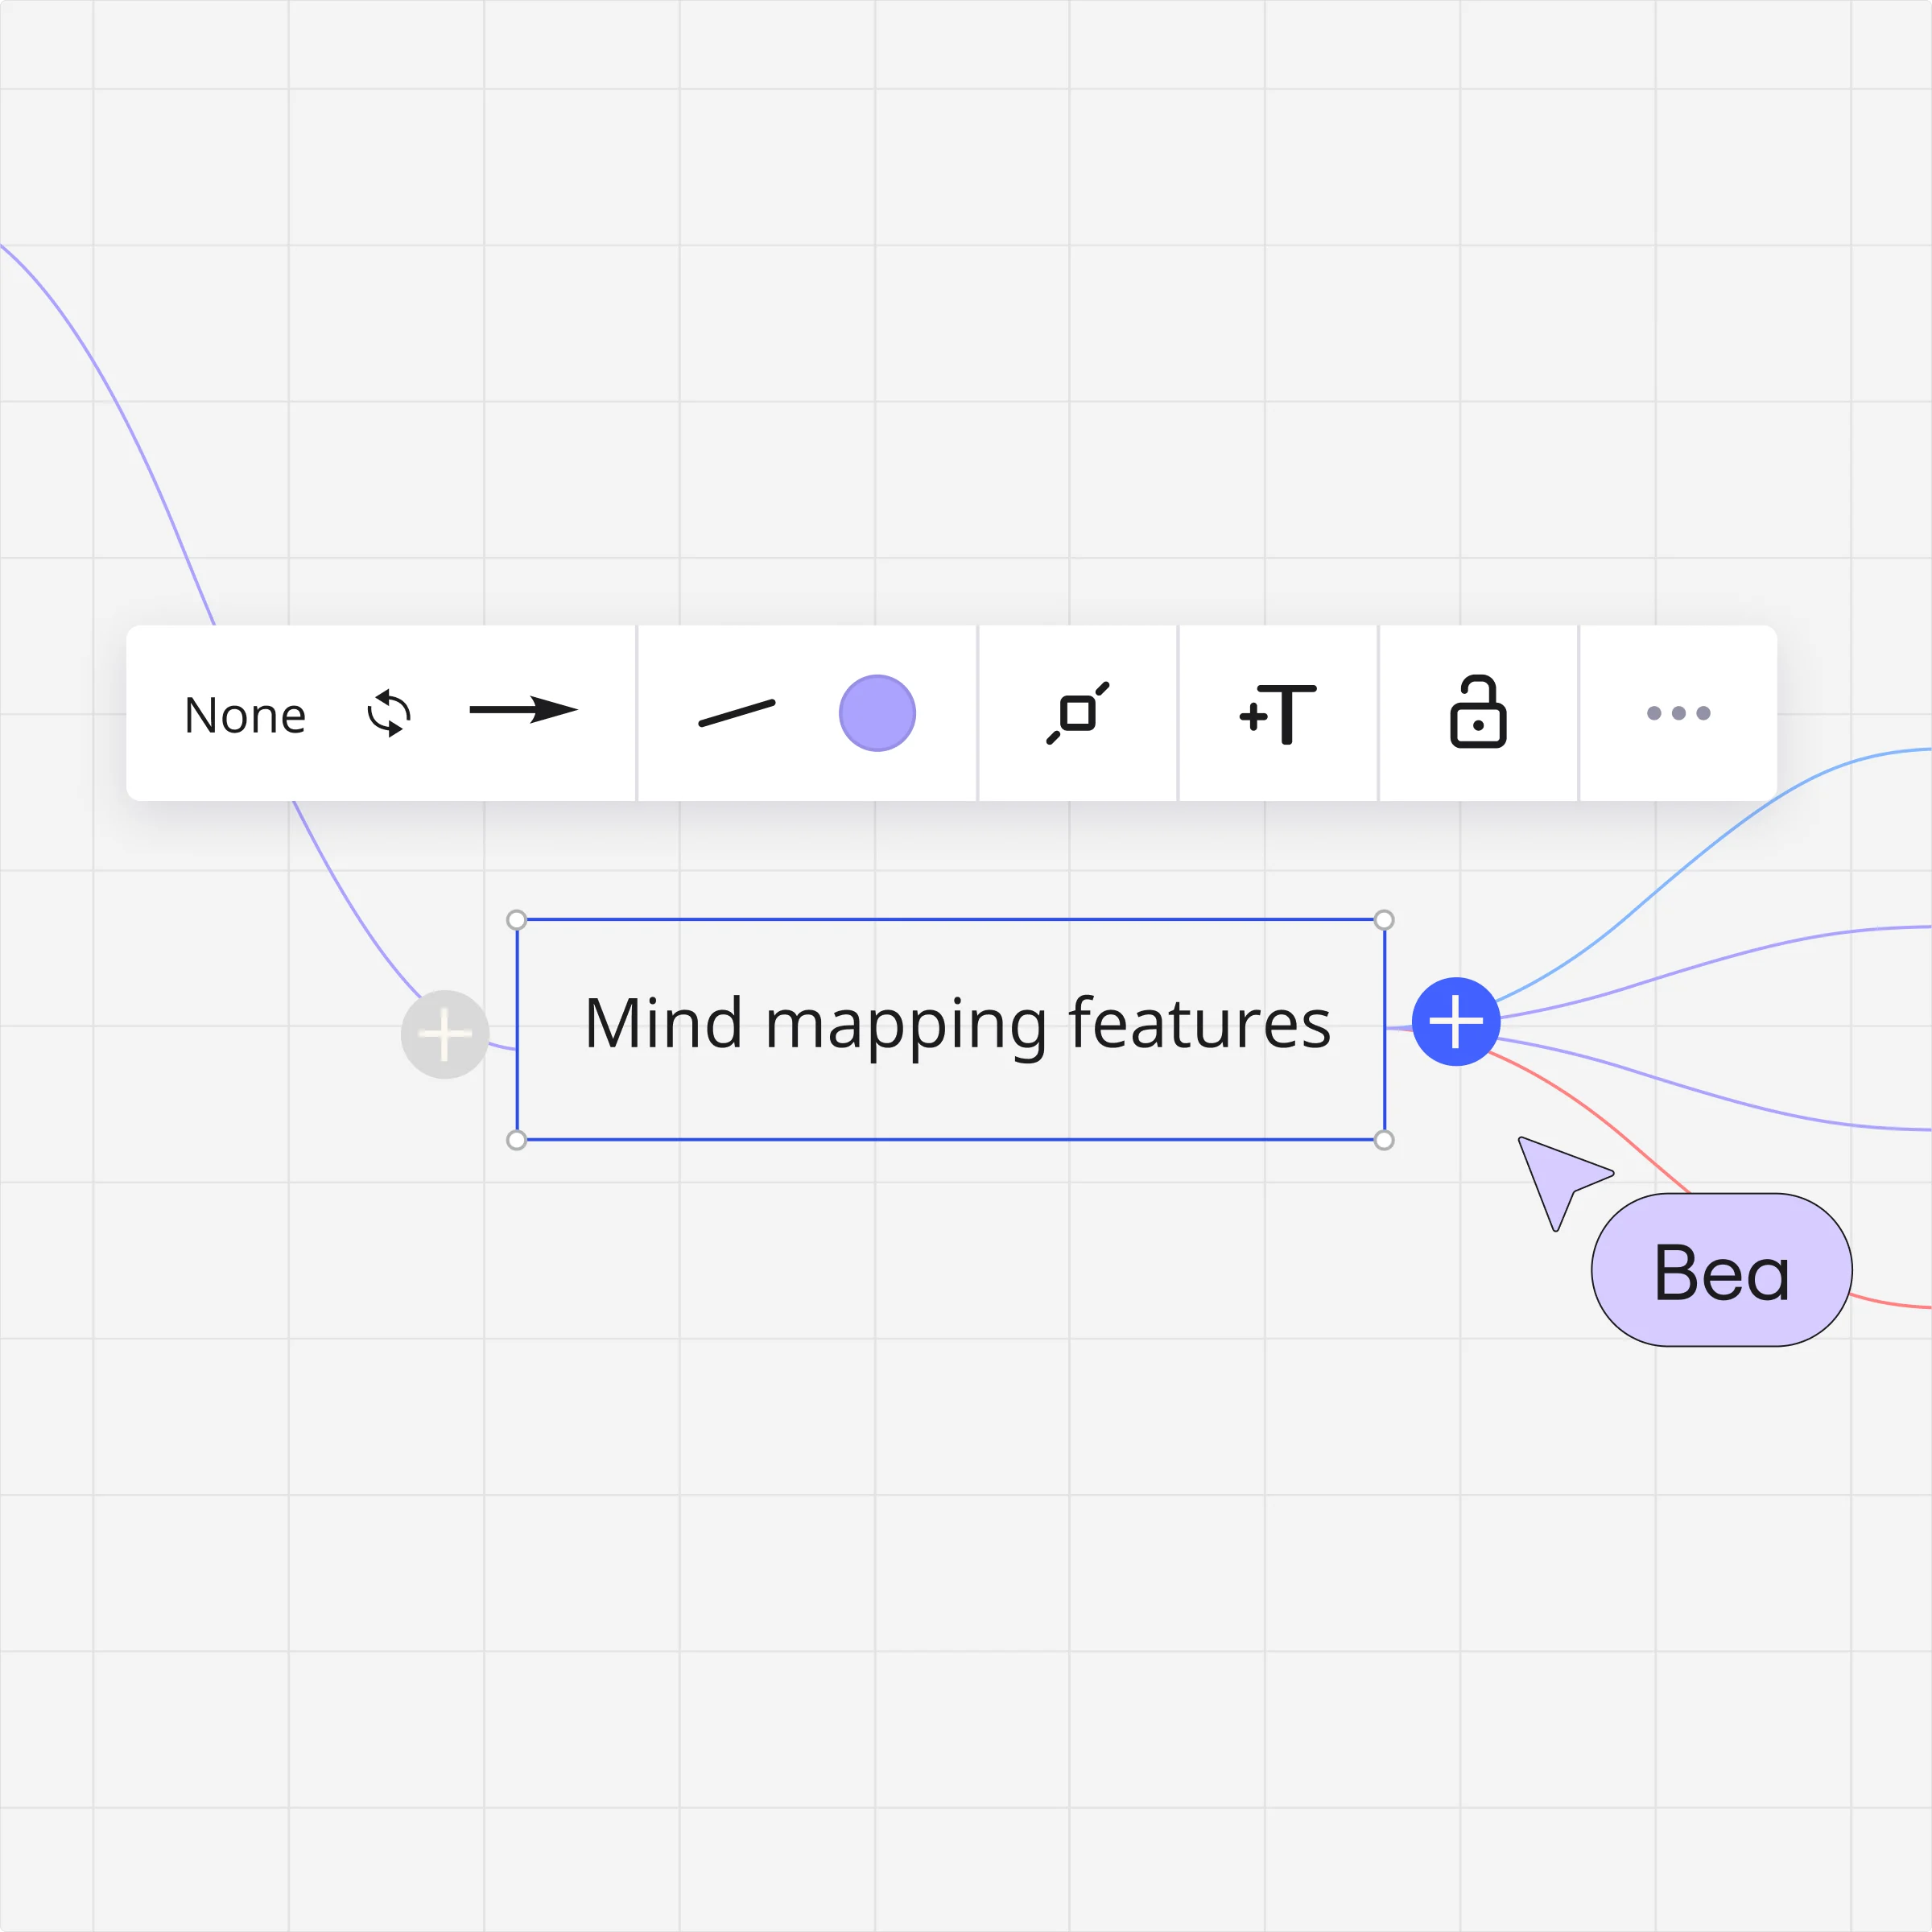 An image showing how to make a mind map in Miro